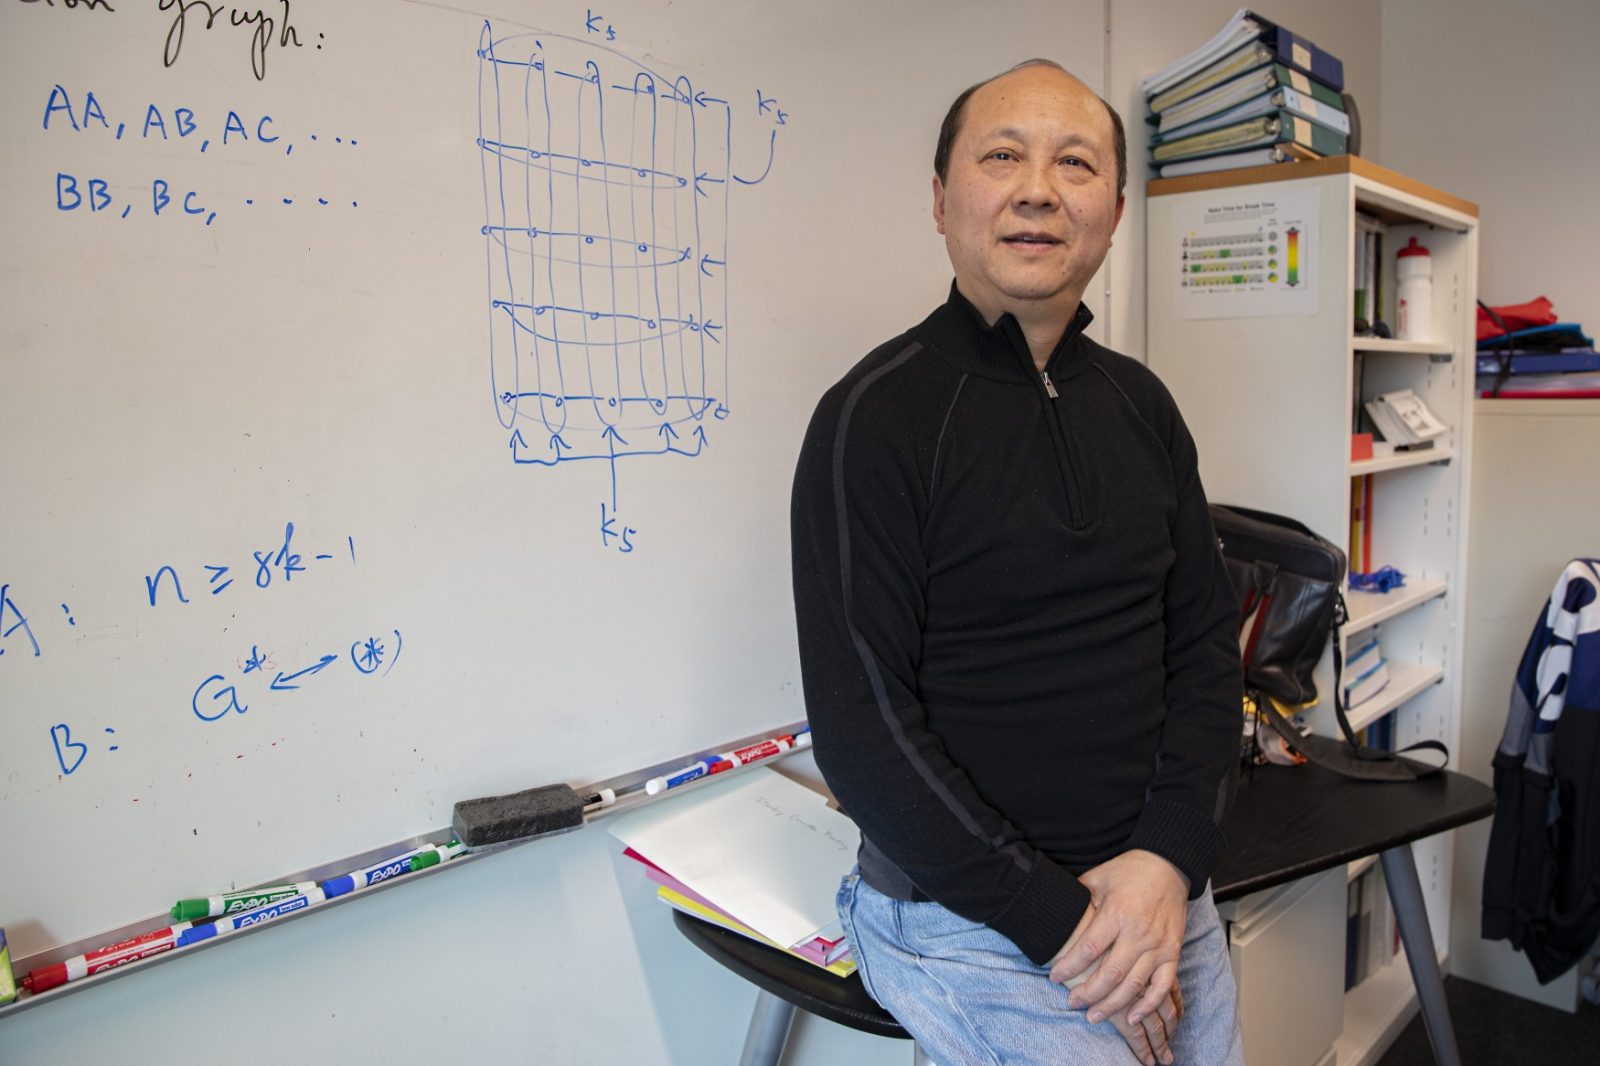 Roger Yu, professor of mathematics and statistics and the director of the Centre for Optimization and Data Science